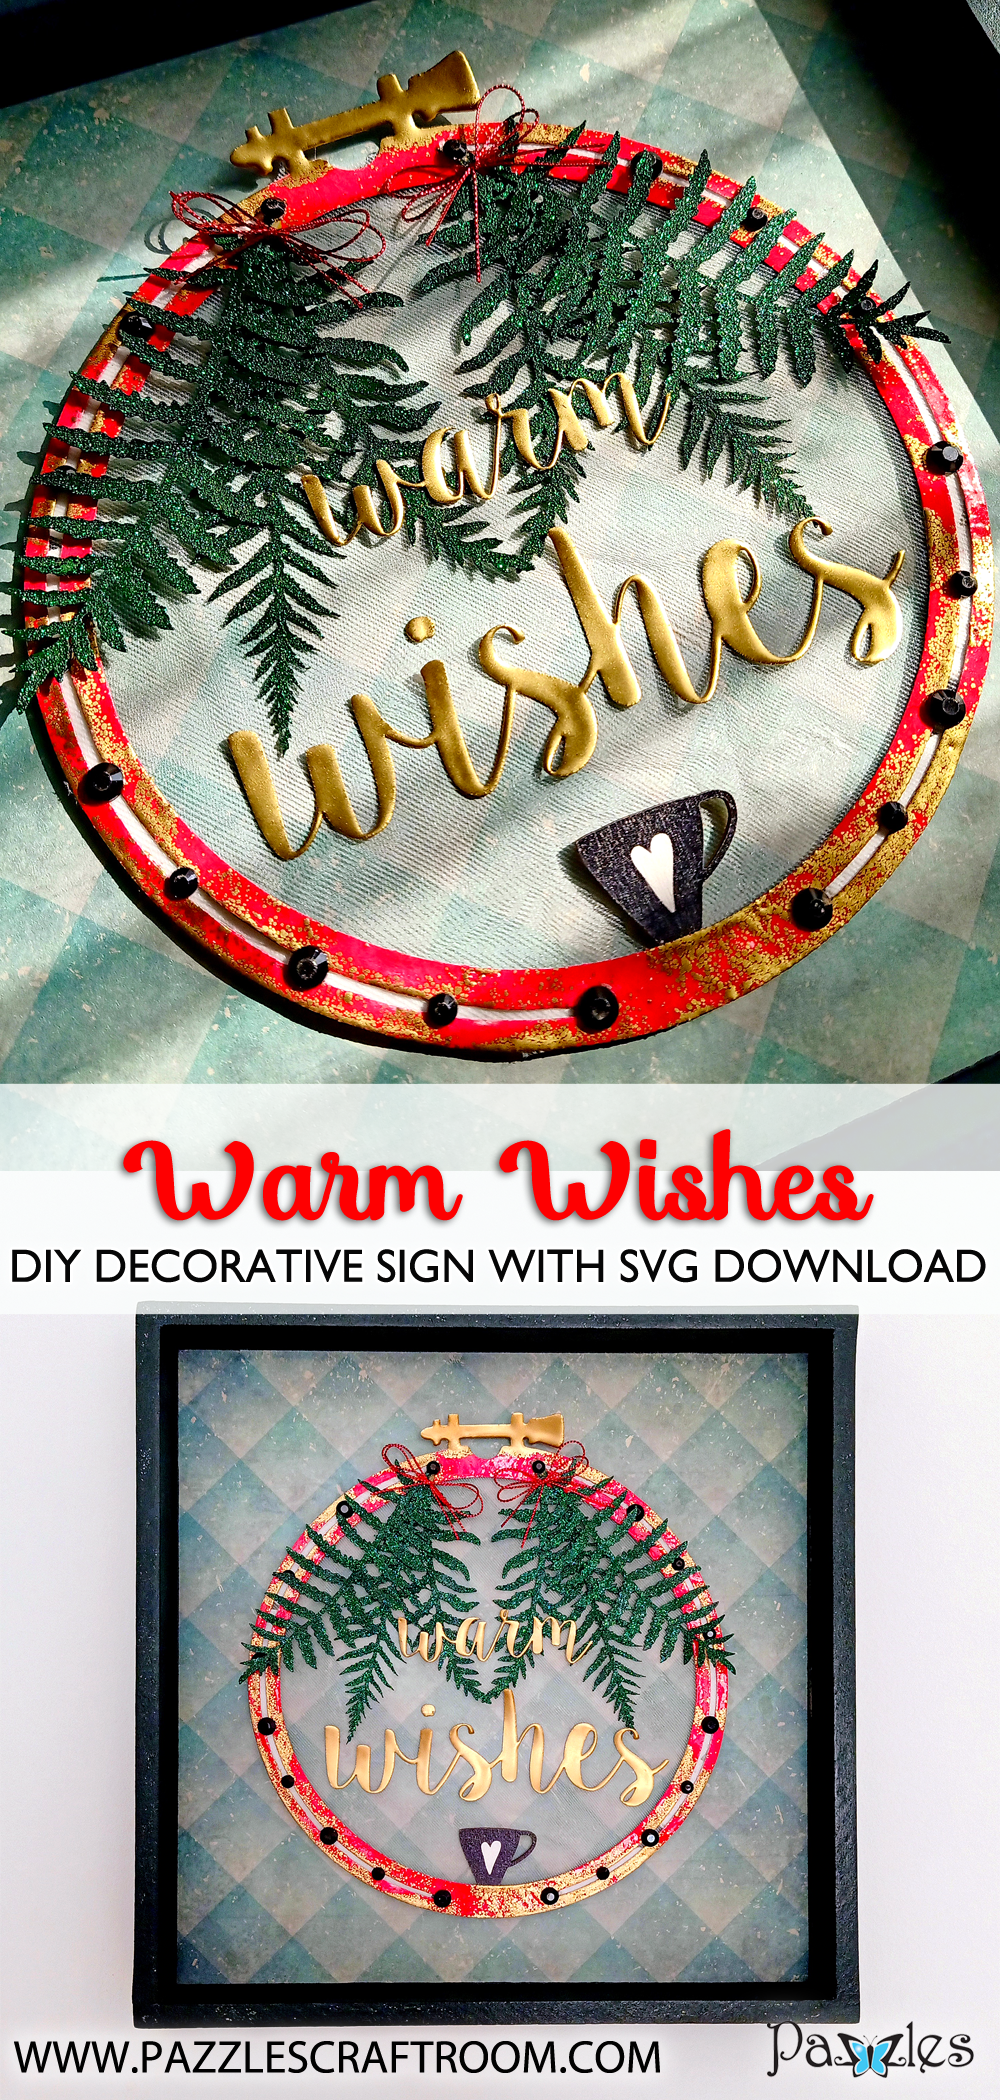 Pazzles DIY Warm Wishes Decorative Sign with instant SVG download. Compatible with all major electronic cutters including Pazzles Inspiration, Cricut, and Silhouette Cameo. Design by Zahraa Darweesh.